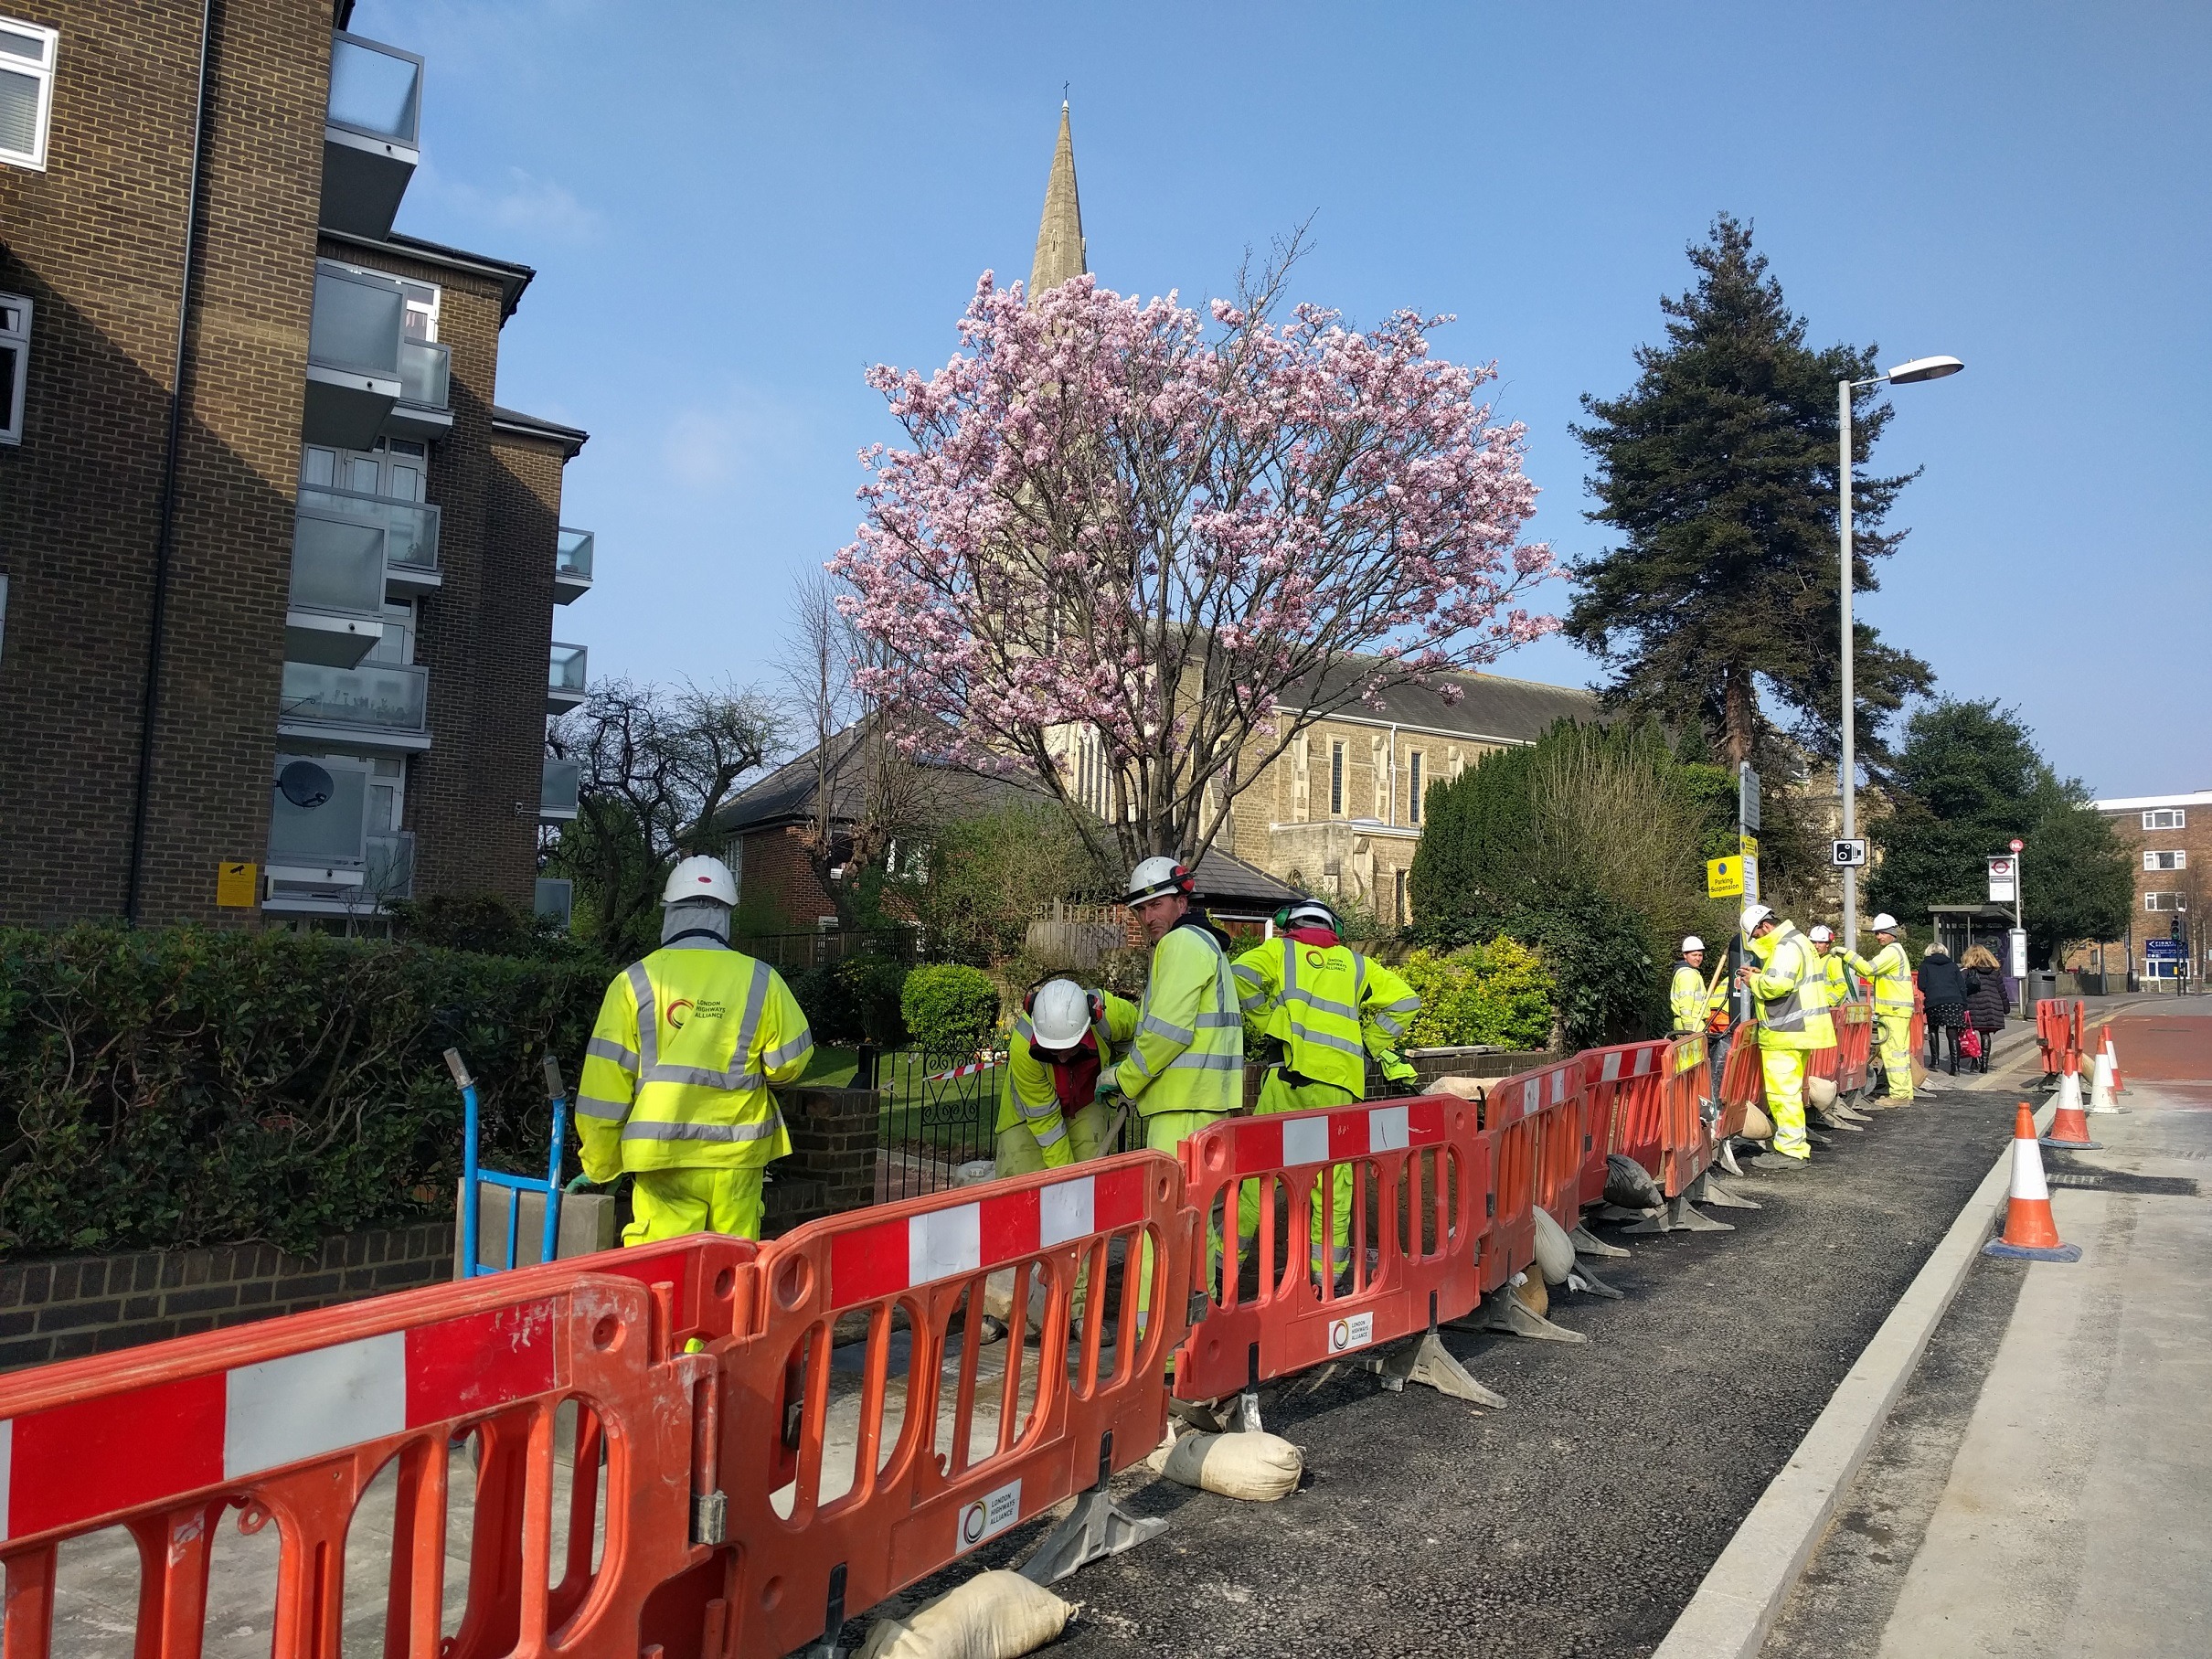 New cycling lane in construction in Surbiton